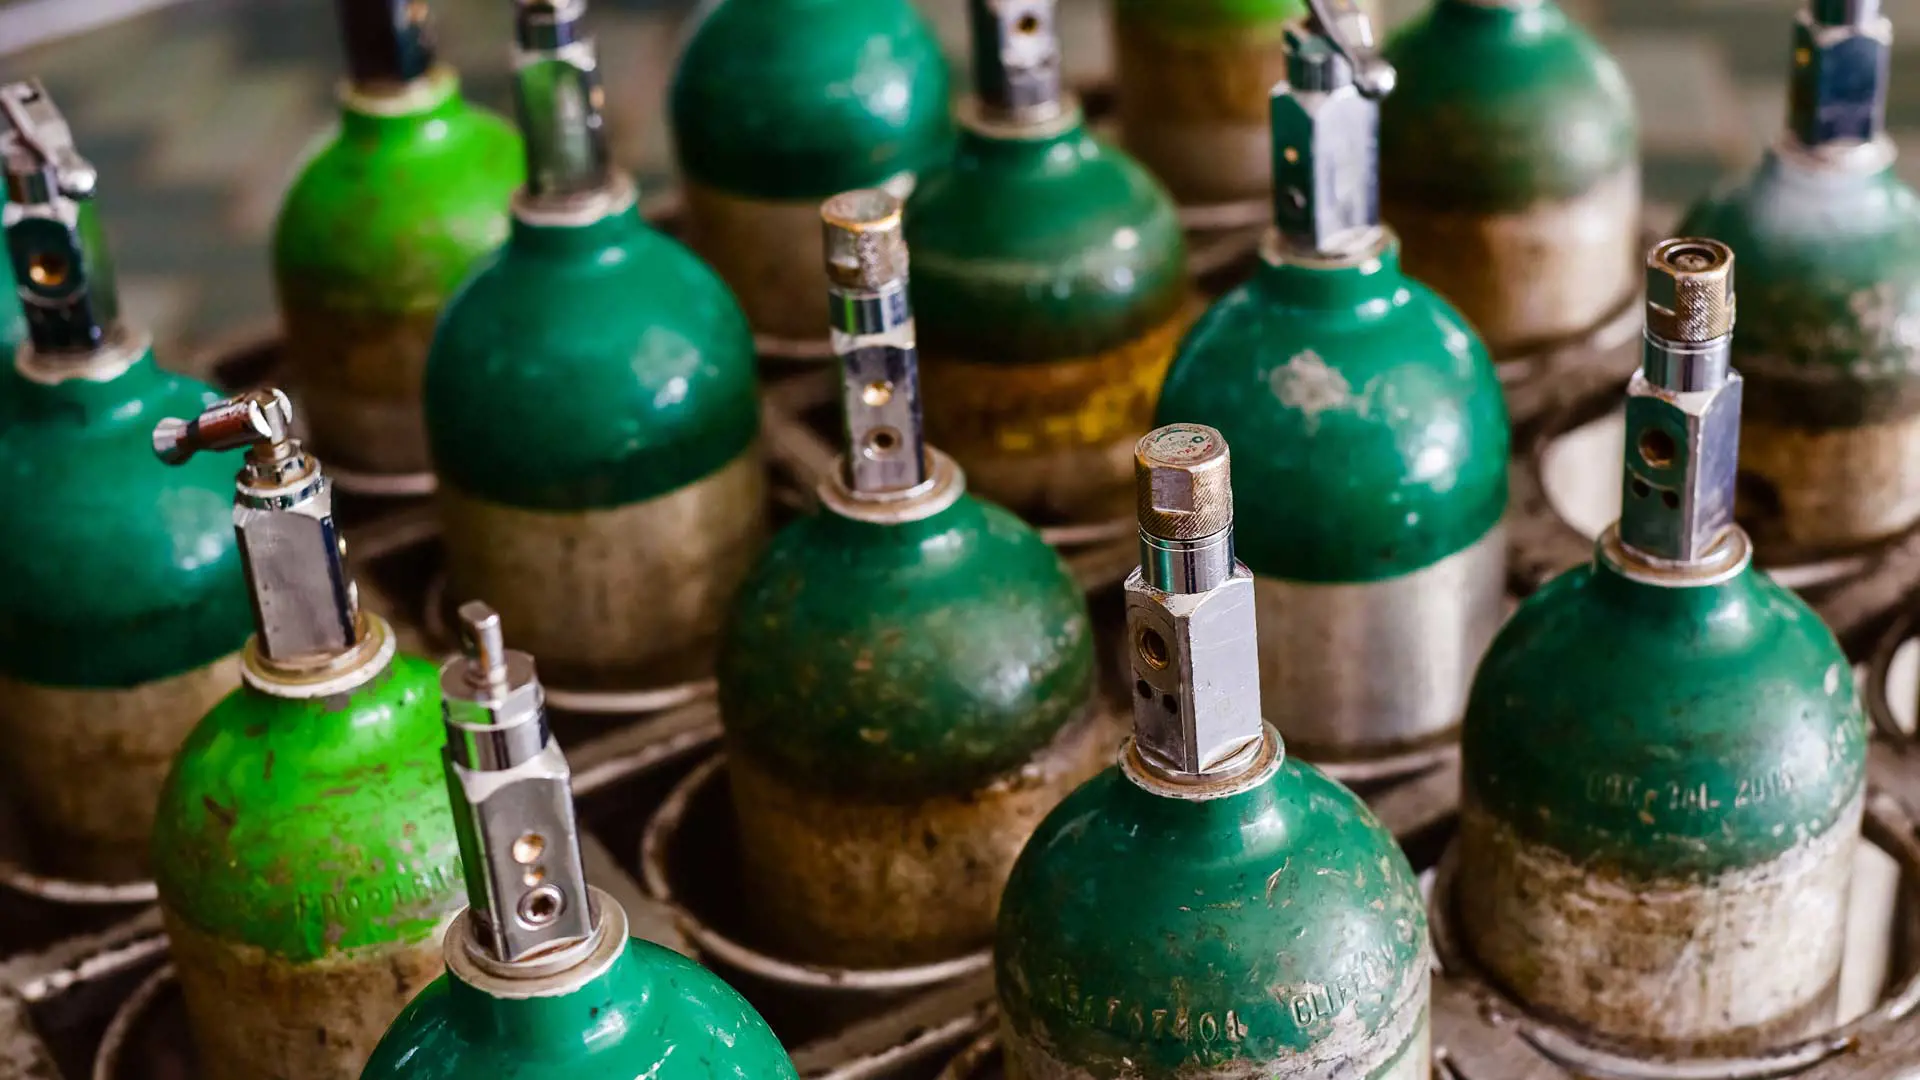 Green oxygen canisters